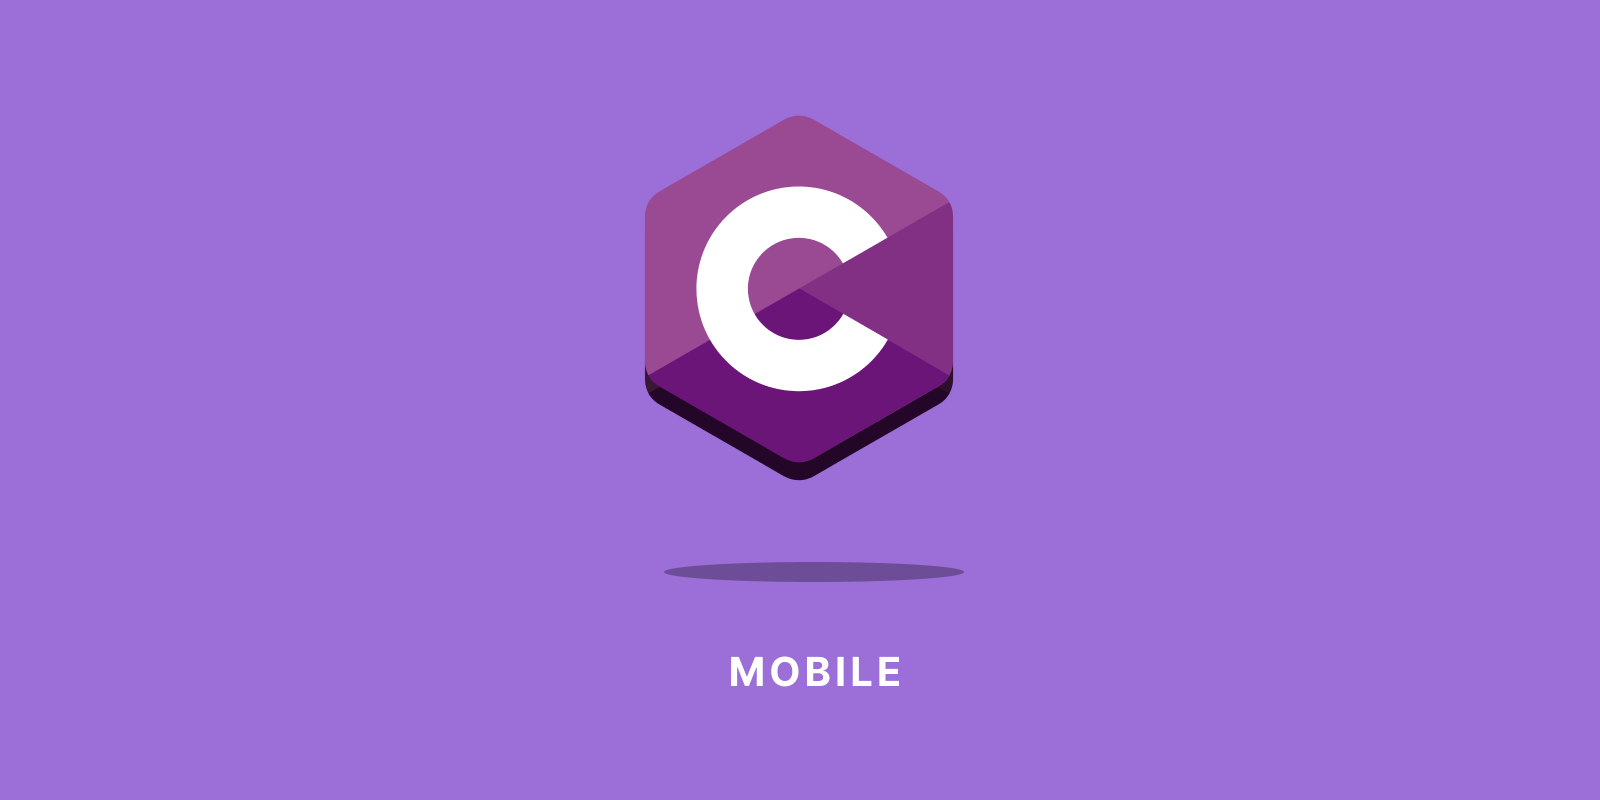 Hire Mobile Developers